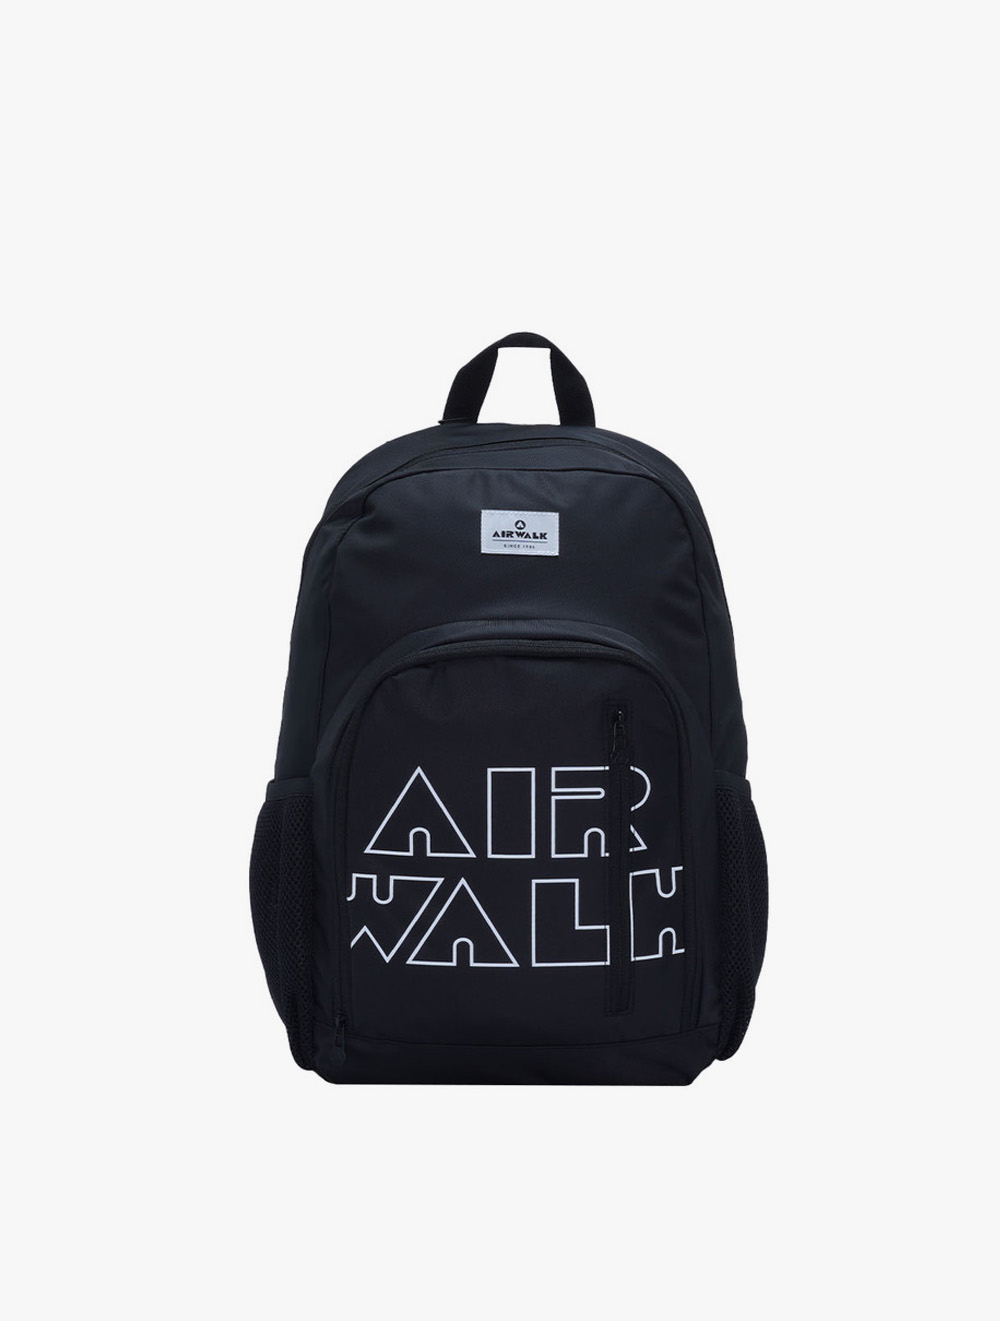 d_T.S on Instagram: “Airwalk backpack ❌sold Price Comment book to buy” |  Bags, Bag pattern, Books to buy